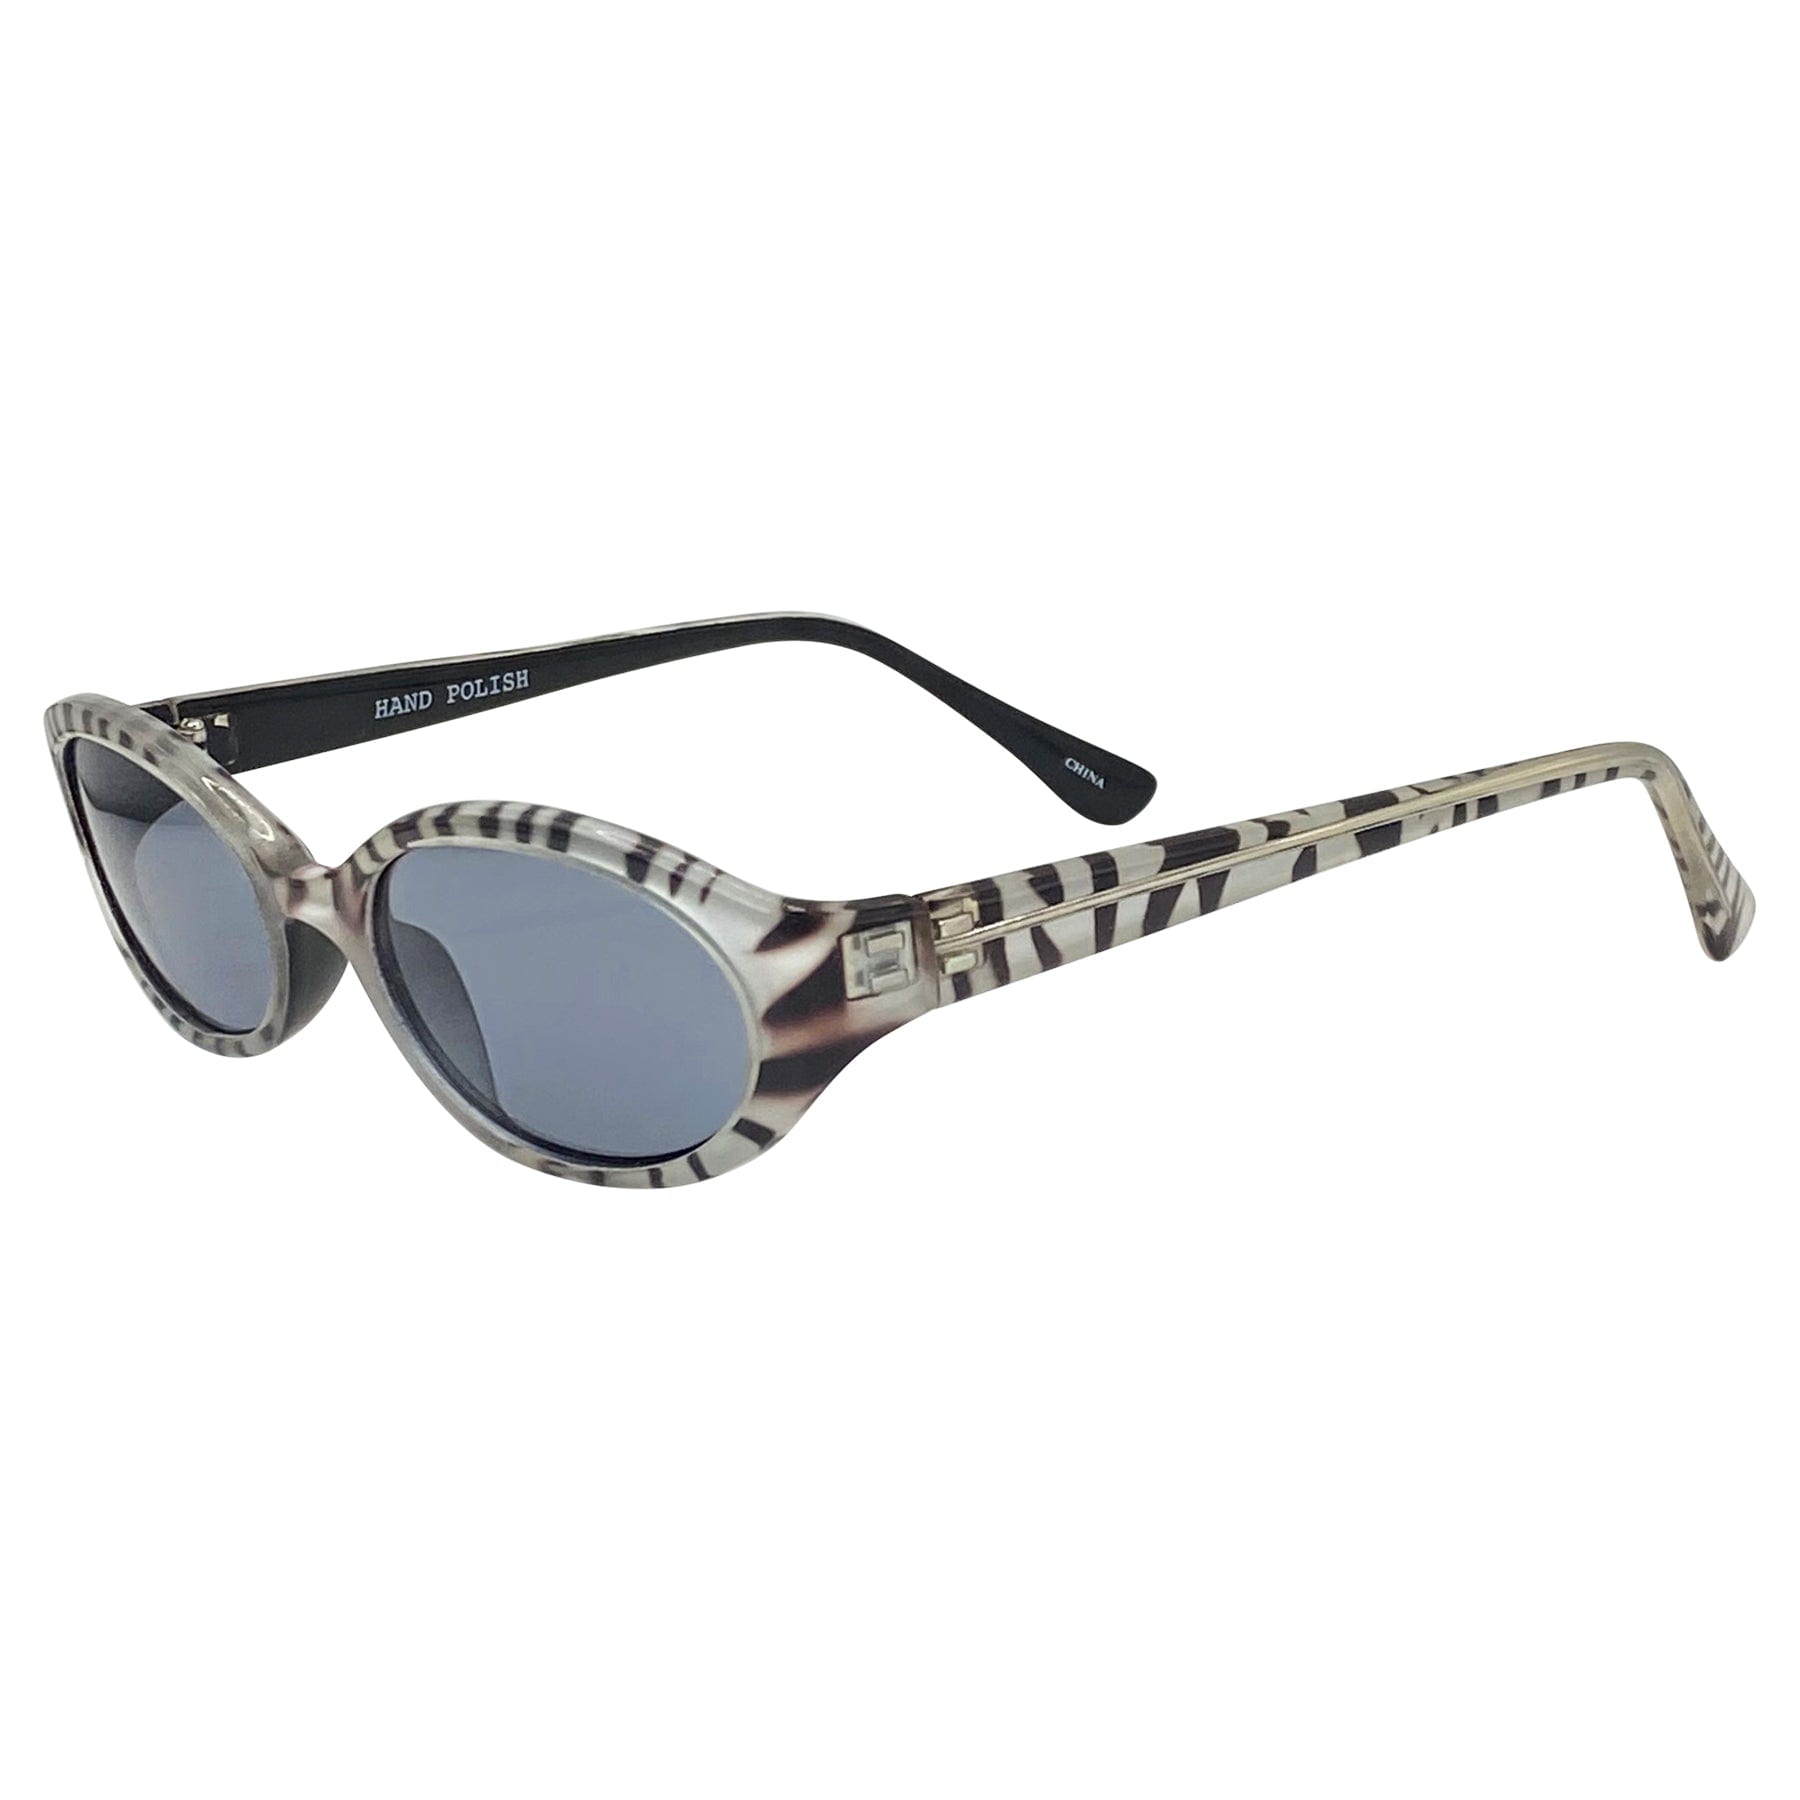 90s retro sunglasses with an oval shape and animal print frames